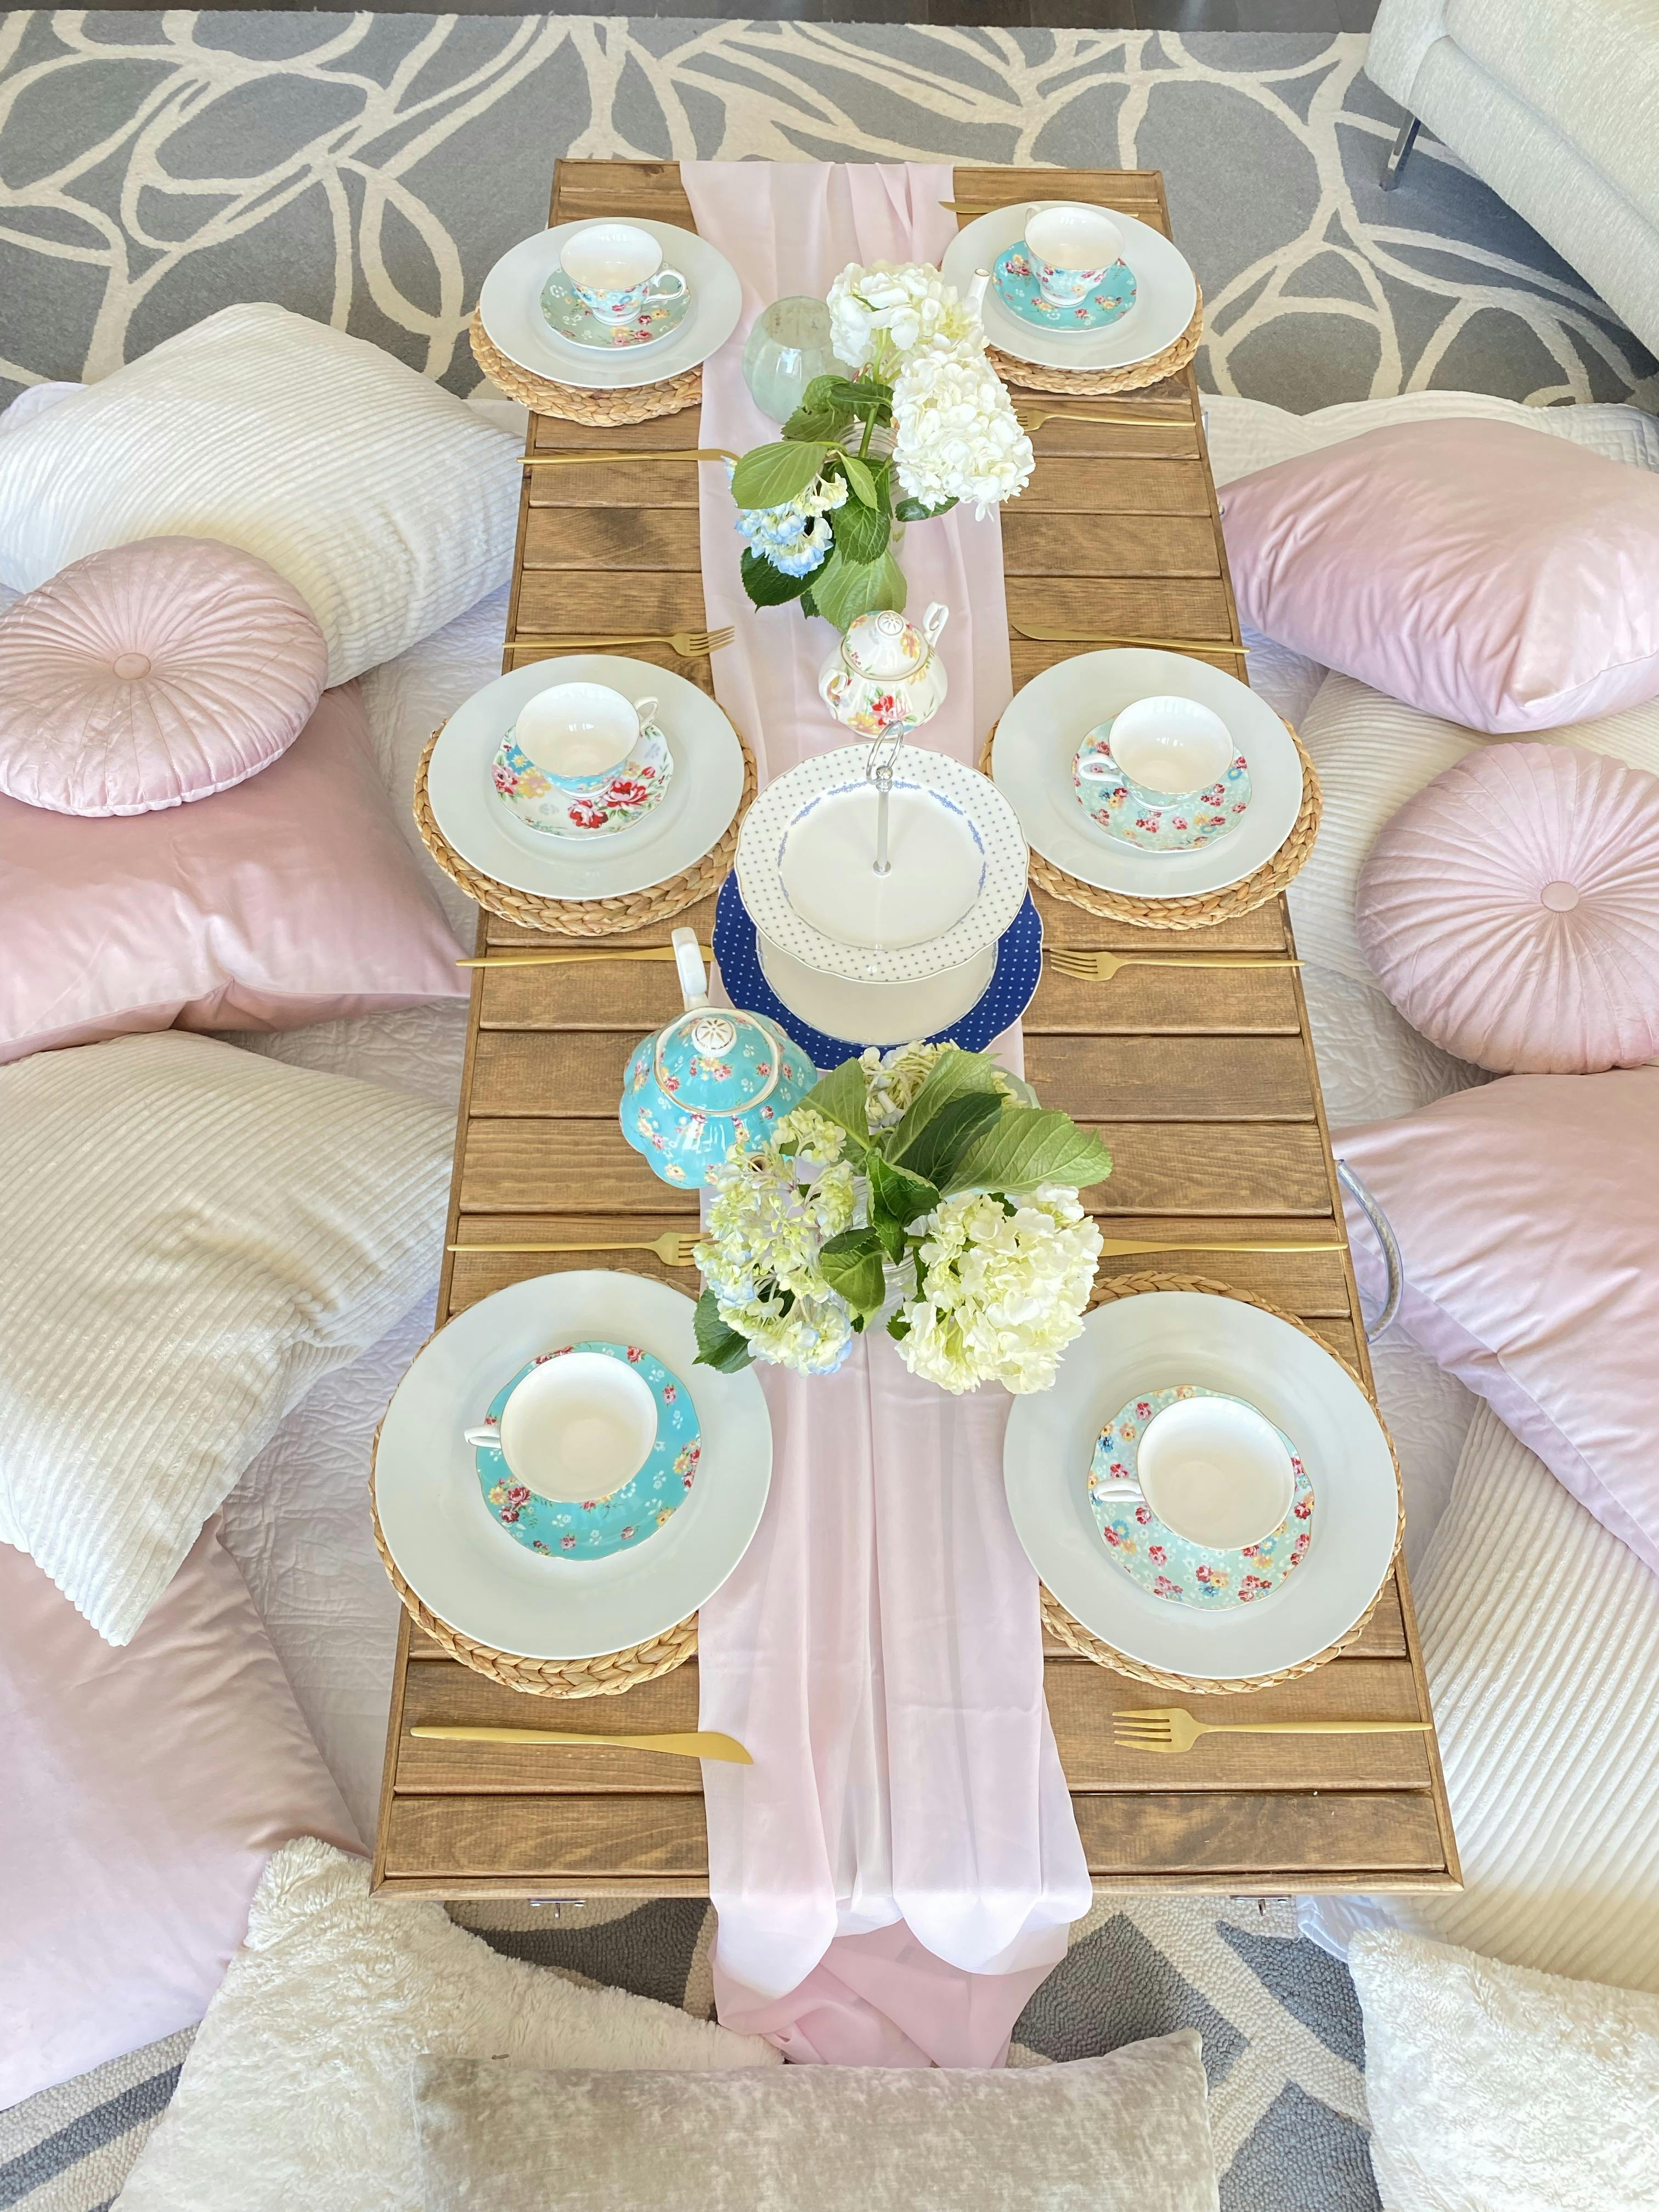 Style Low Table & Pillows Rent for Events